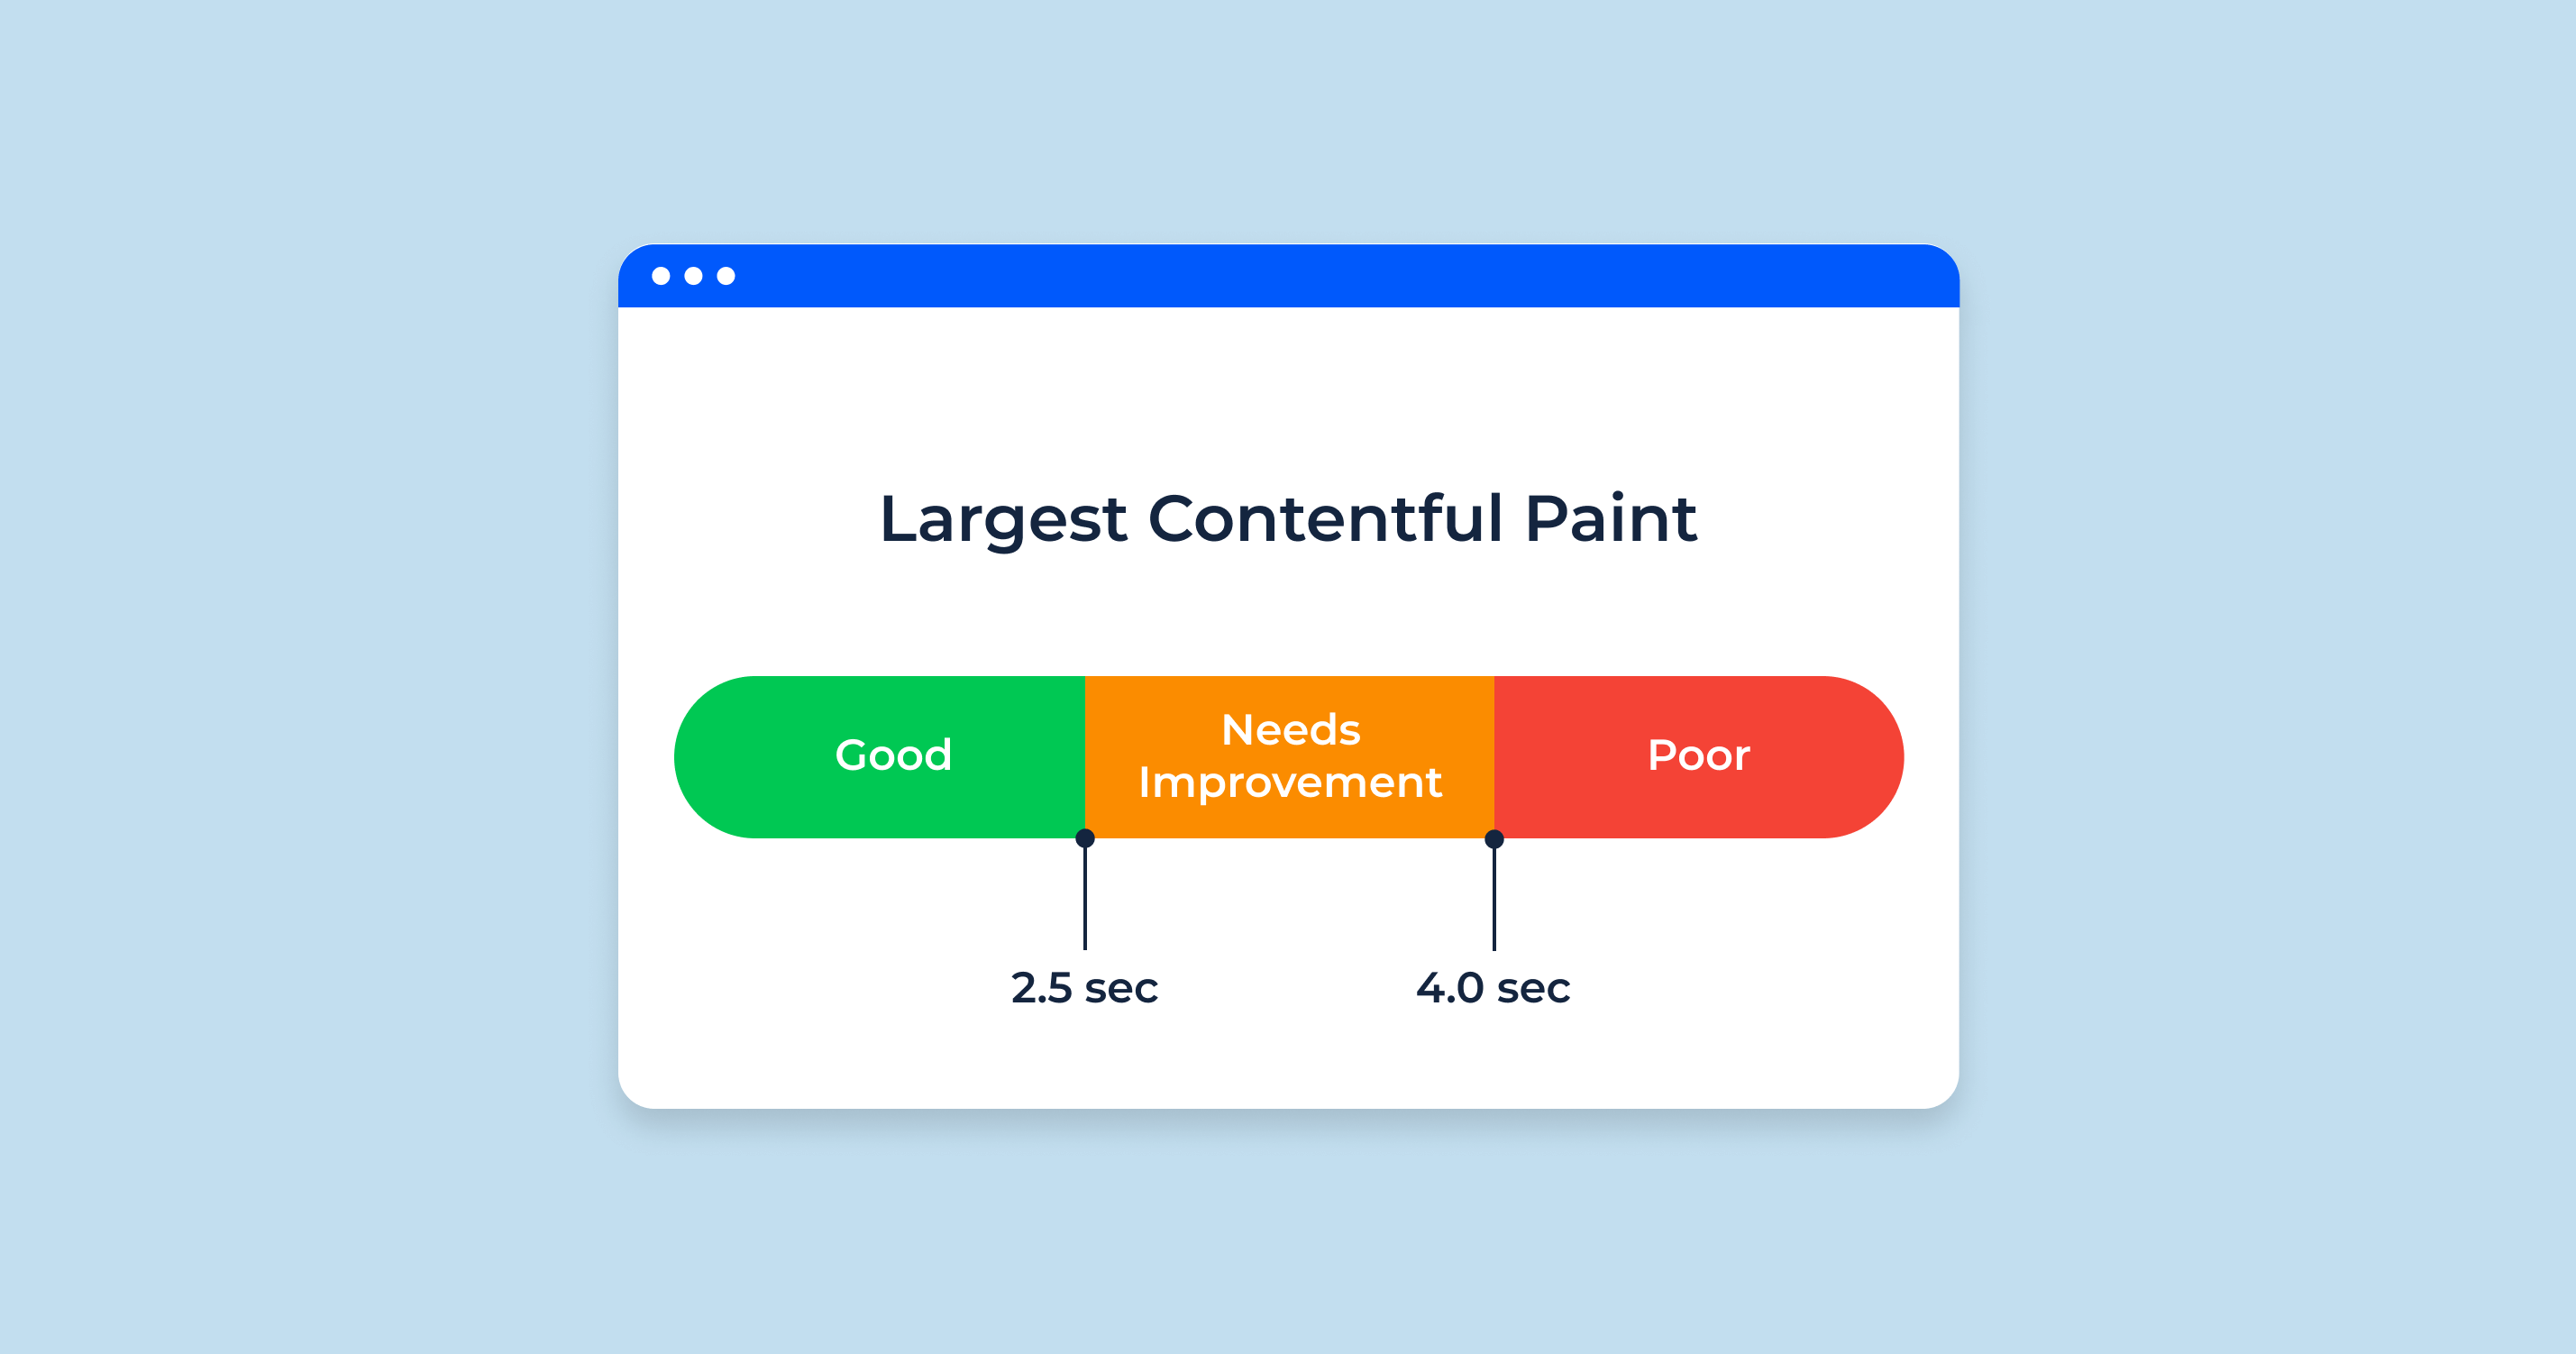 What Is the Largest Contentful Paint (LCP)